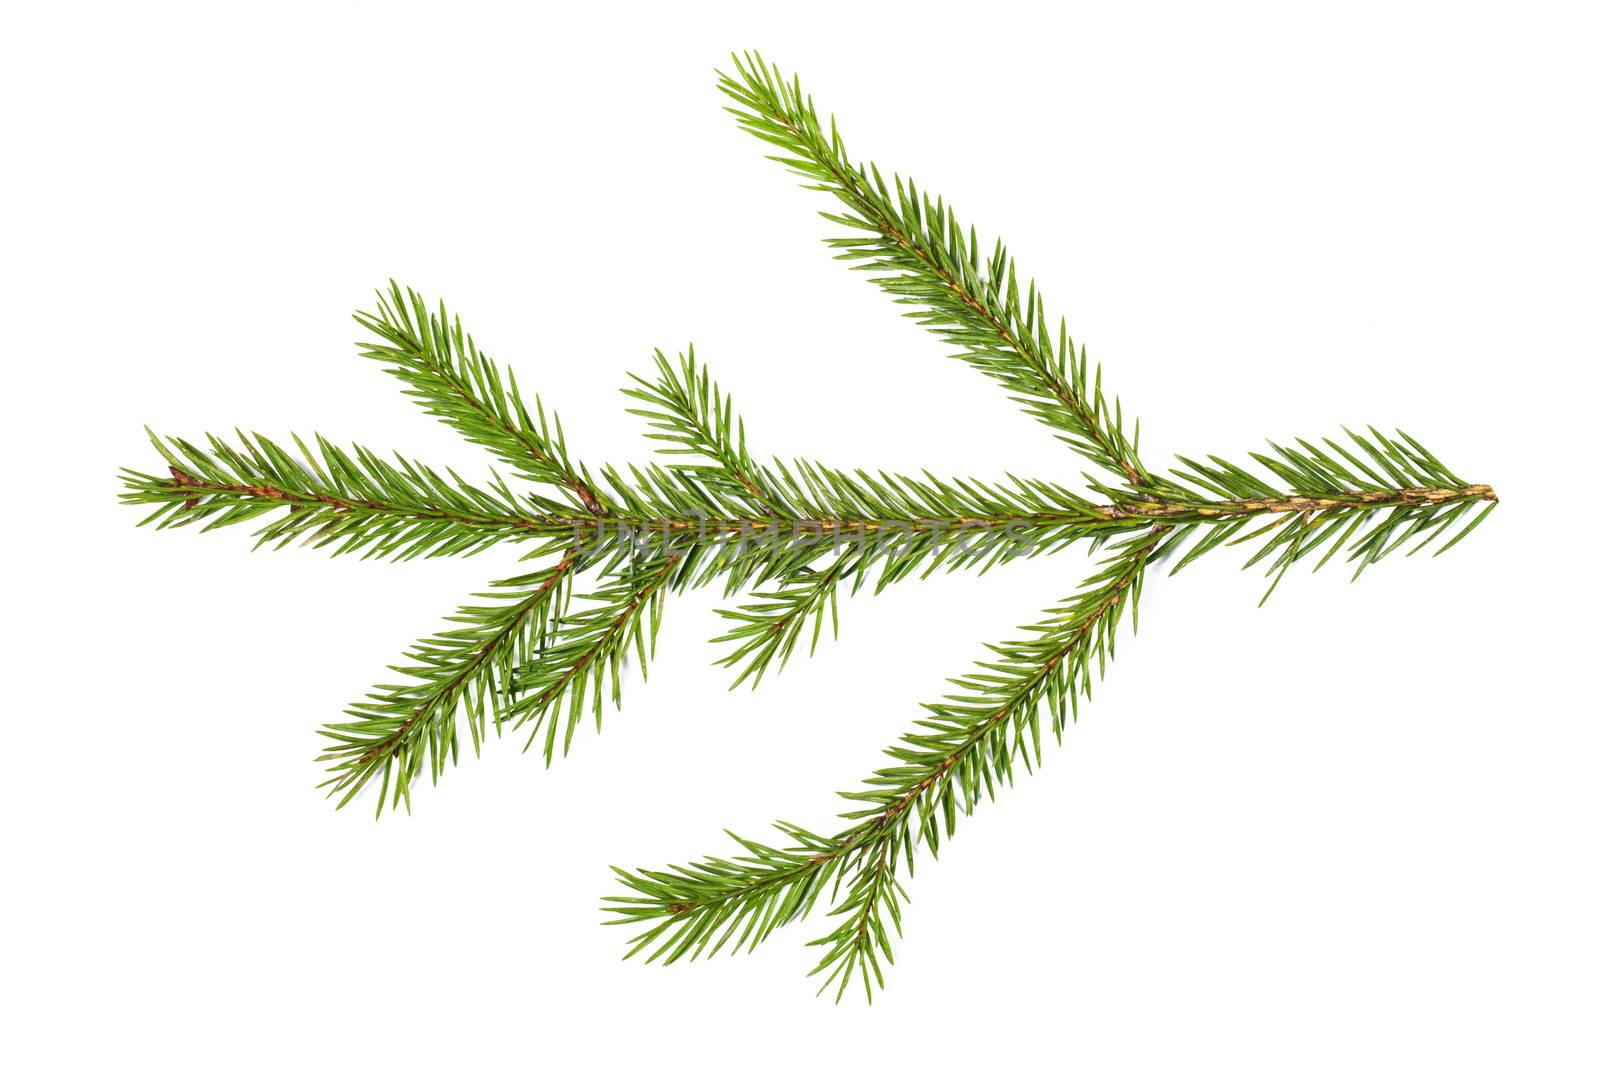 Evergreen christmas fir pine tree branch on white background